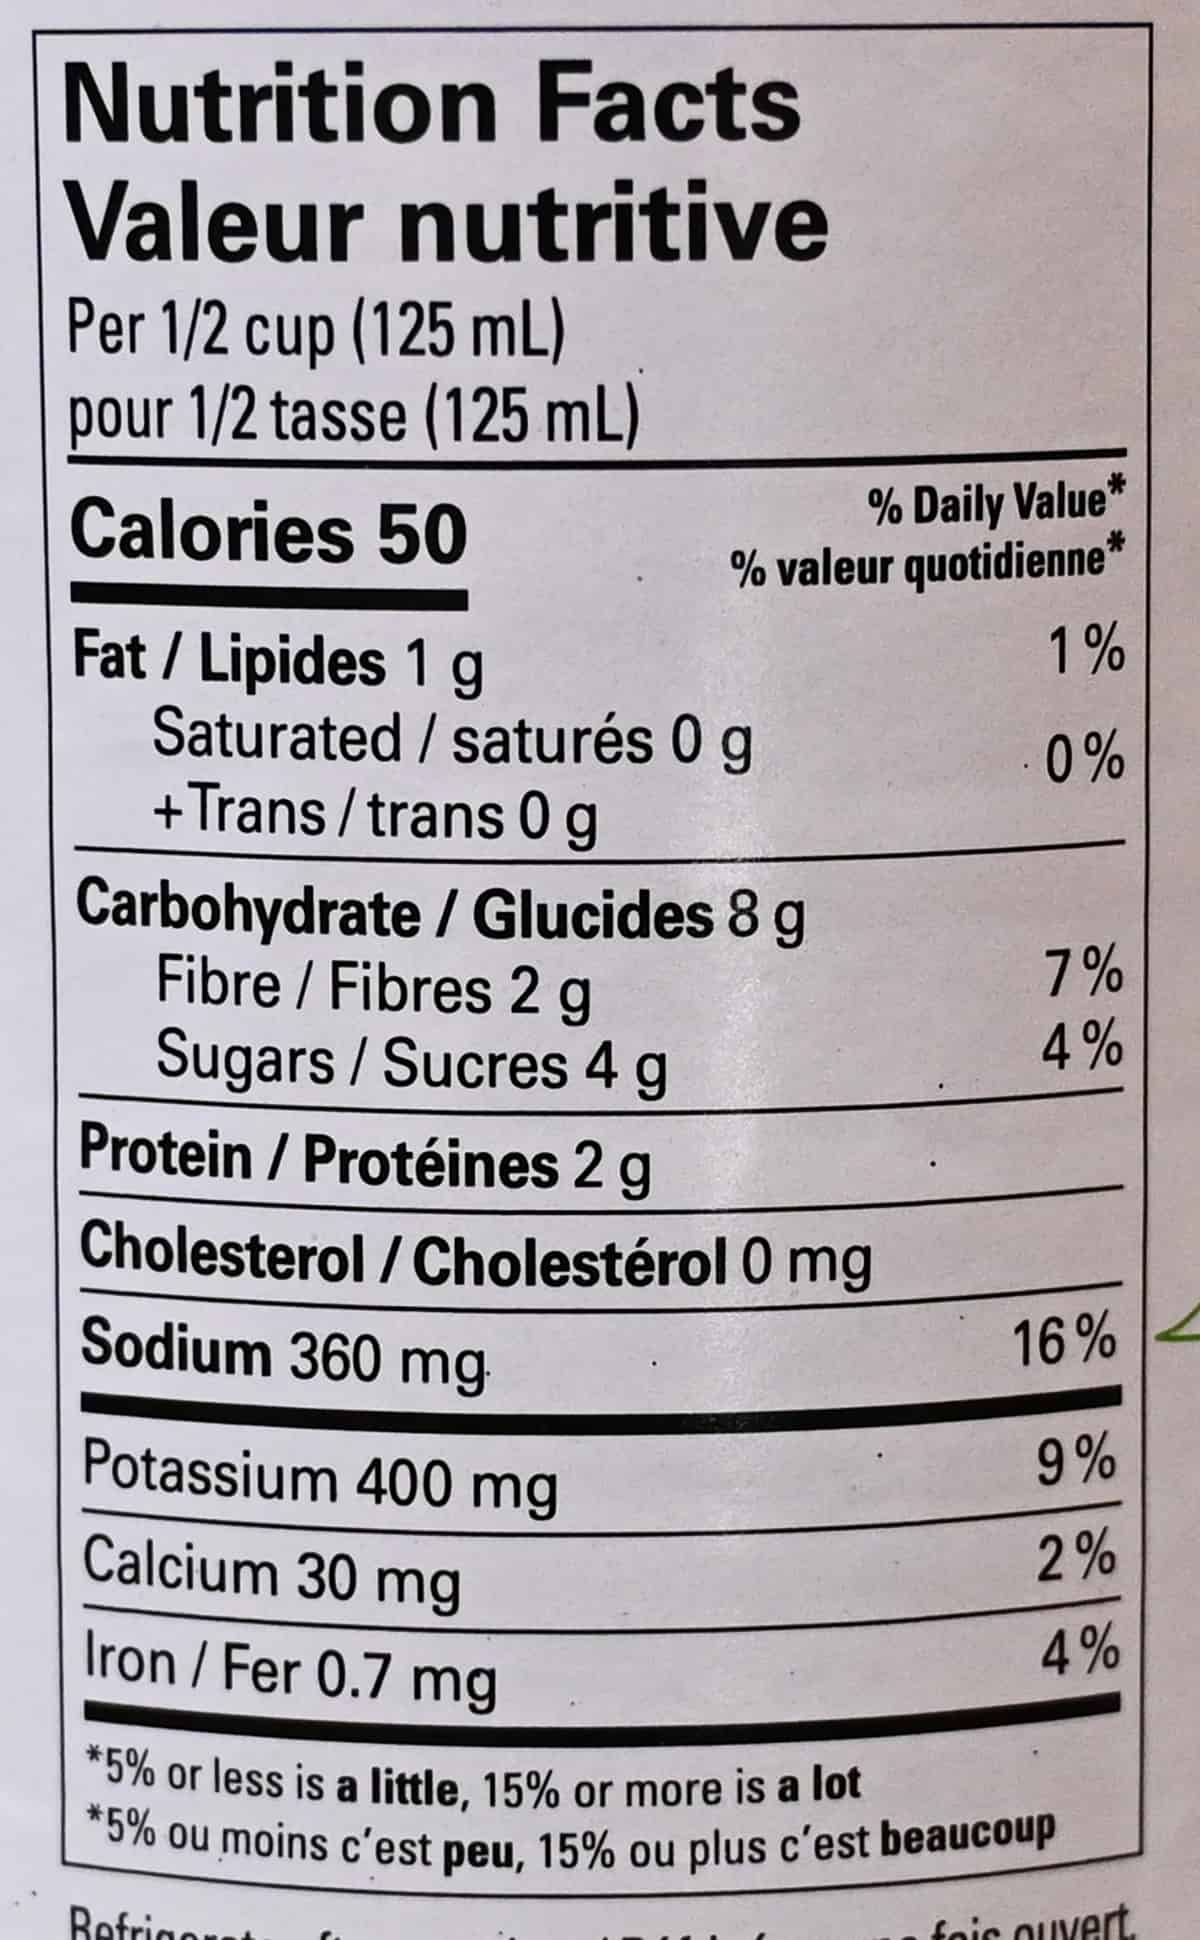 Image of the nutrition facts label from the back of the jar.